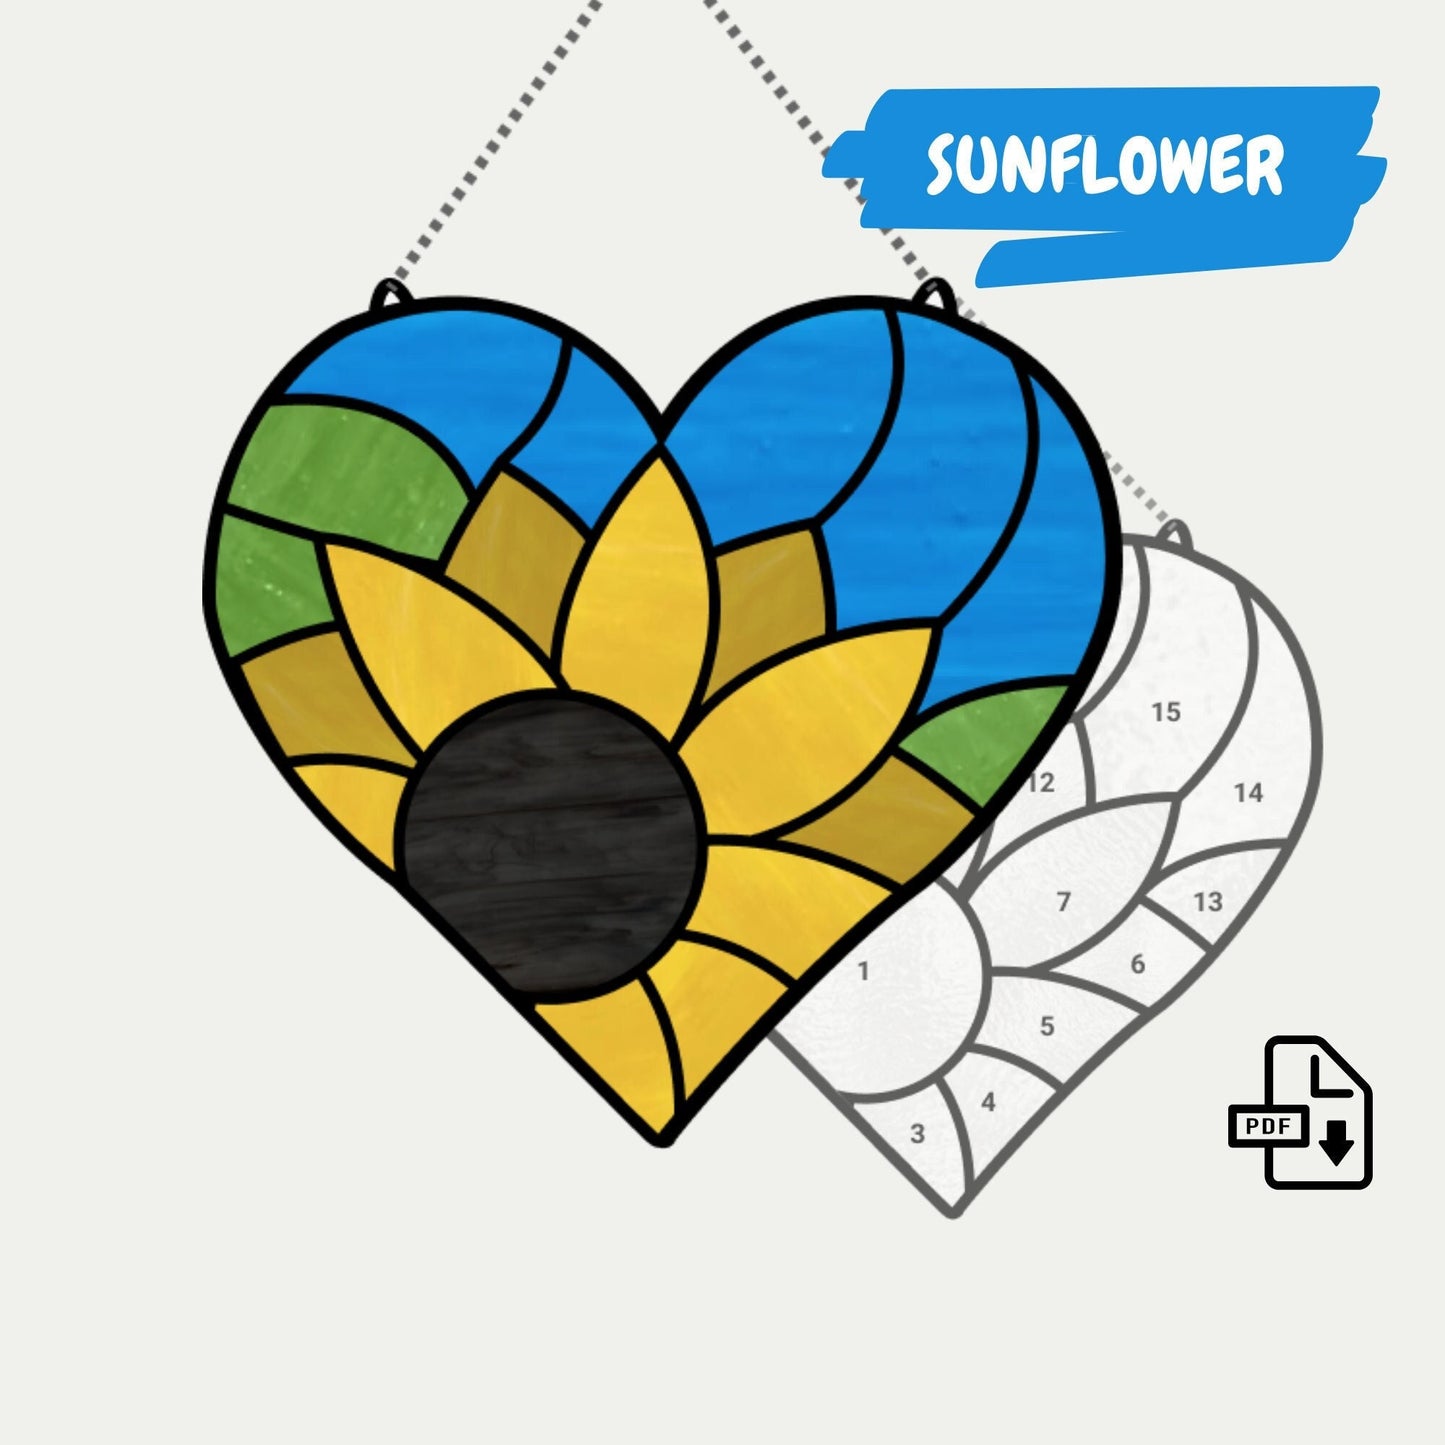 Stained Glass Heart Suncatcher Pattern With Sunflower